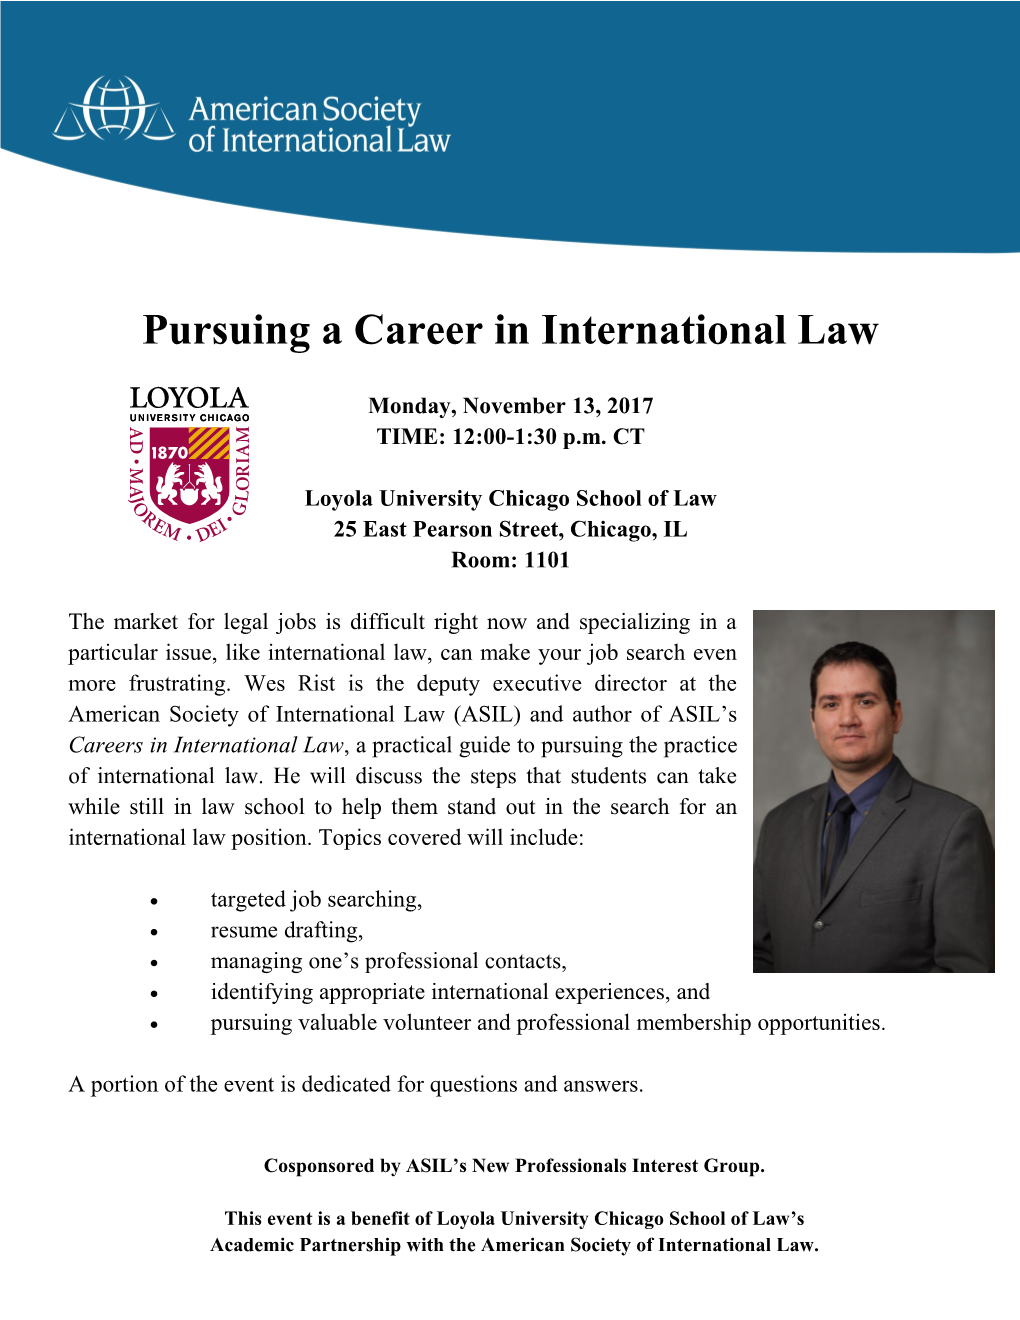 Pursuing a Career in International Law